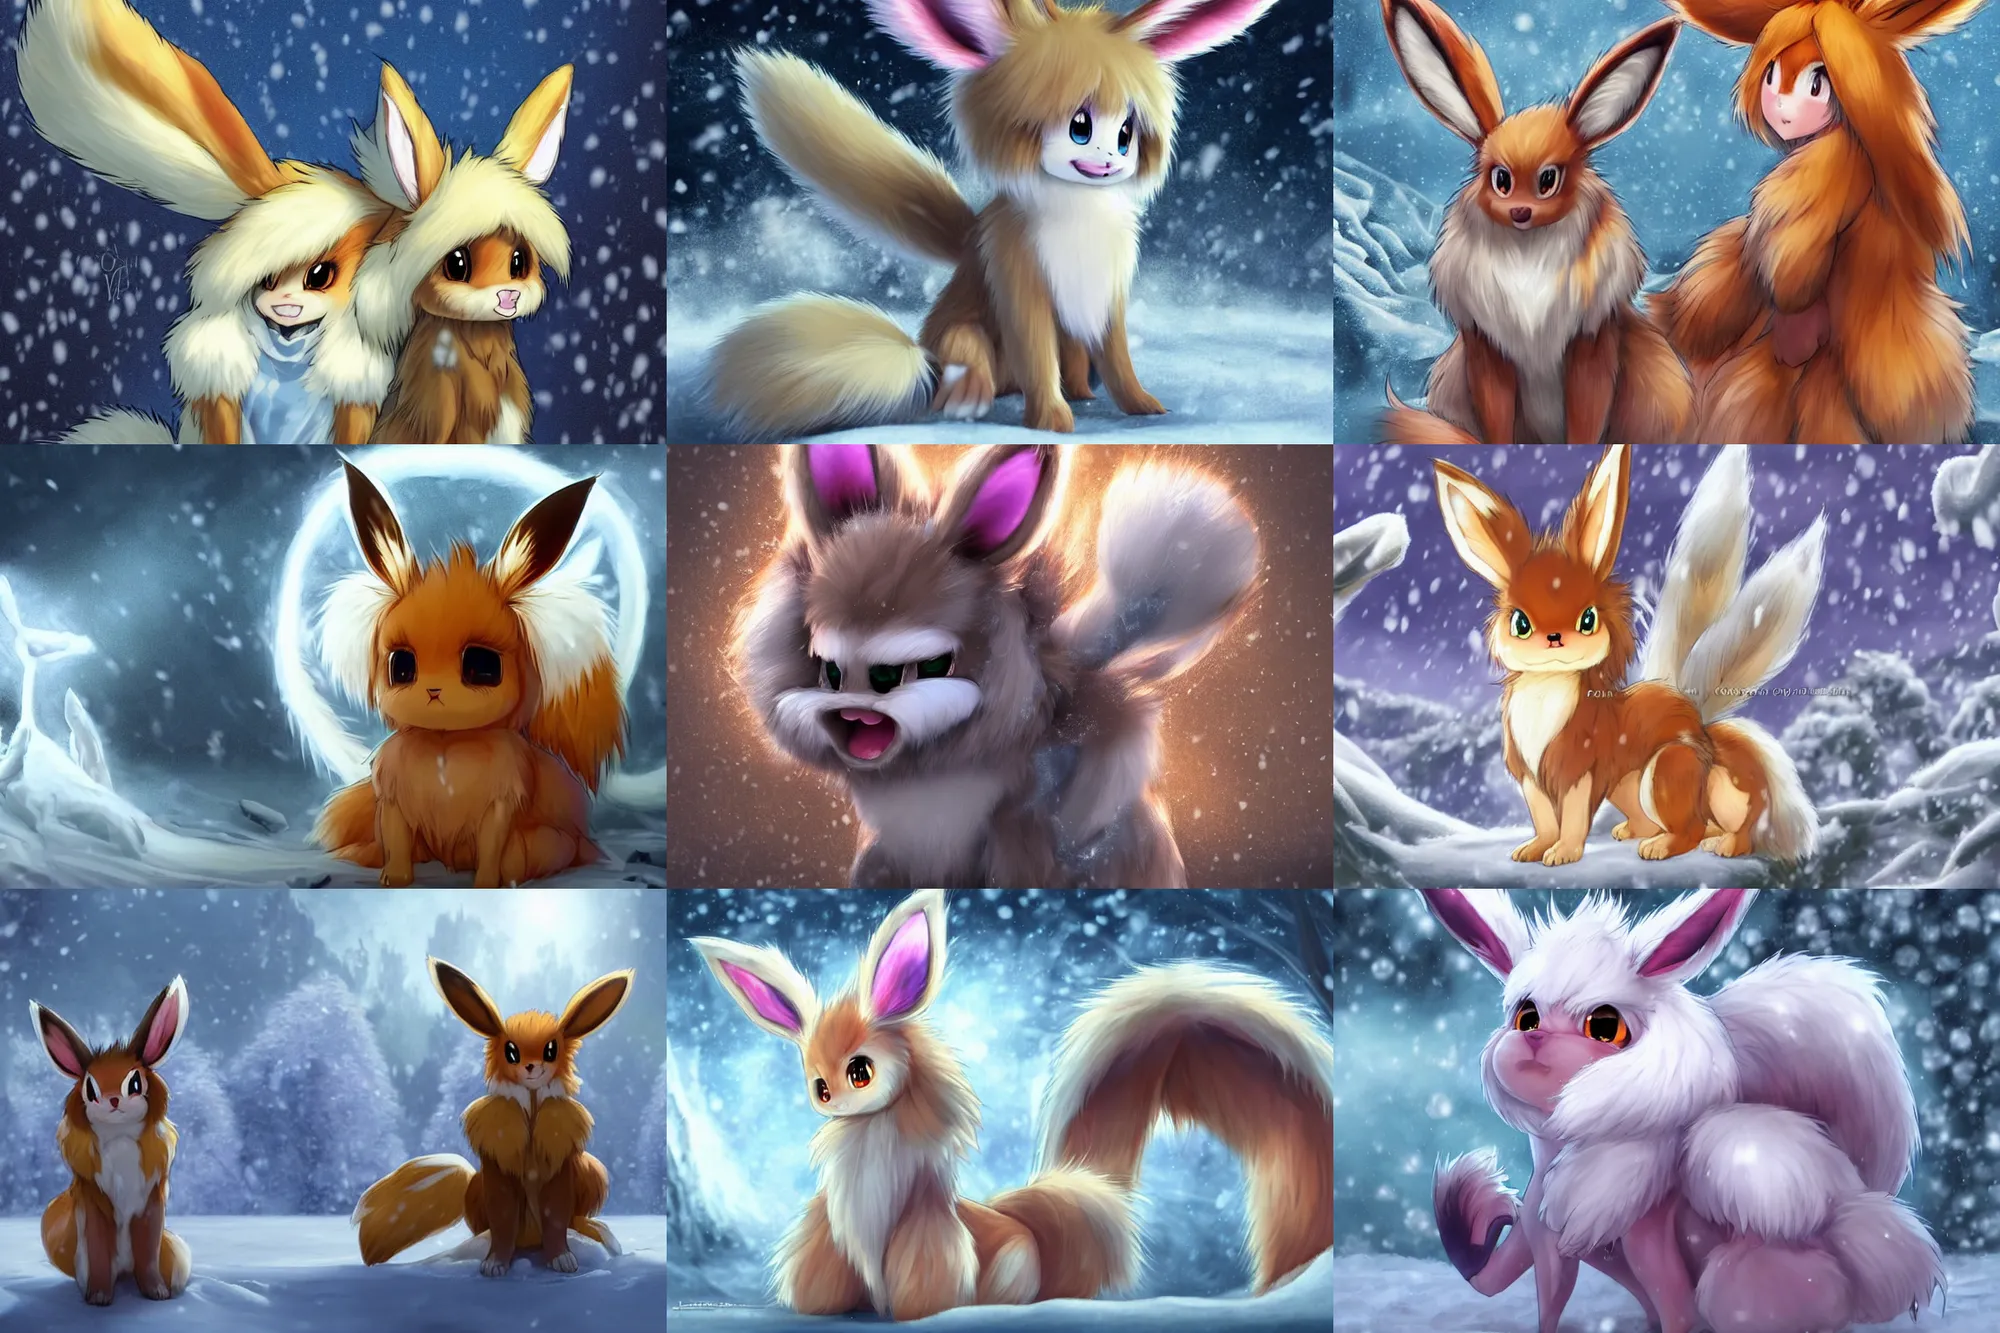 Prompt: fan art rendering of a happy anthro fuzzy eevee evil comb sitting in snow eevee high resolution anthro eevee humanoid, CGsociety UHD 4K highly detailed, intricate heterochromia sad, watery eyes with clawed finger in nose eevee anthro kneeling poofy synthetic fur tail bloody fur wearing bow braided tail looking down bleeding eevee anthro tongue sticking out wearing a sash smiling in winter facing the moon